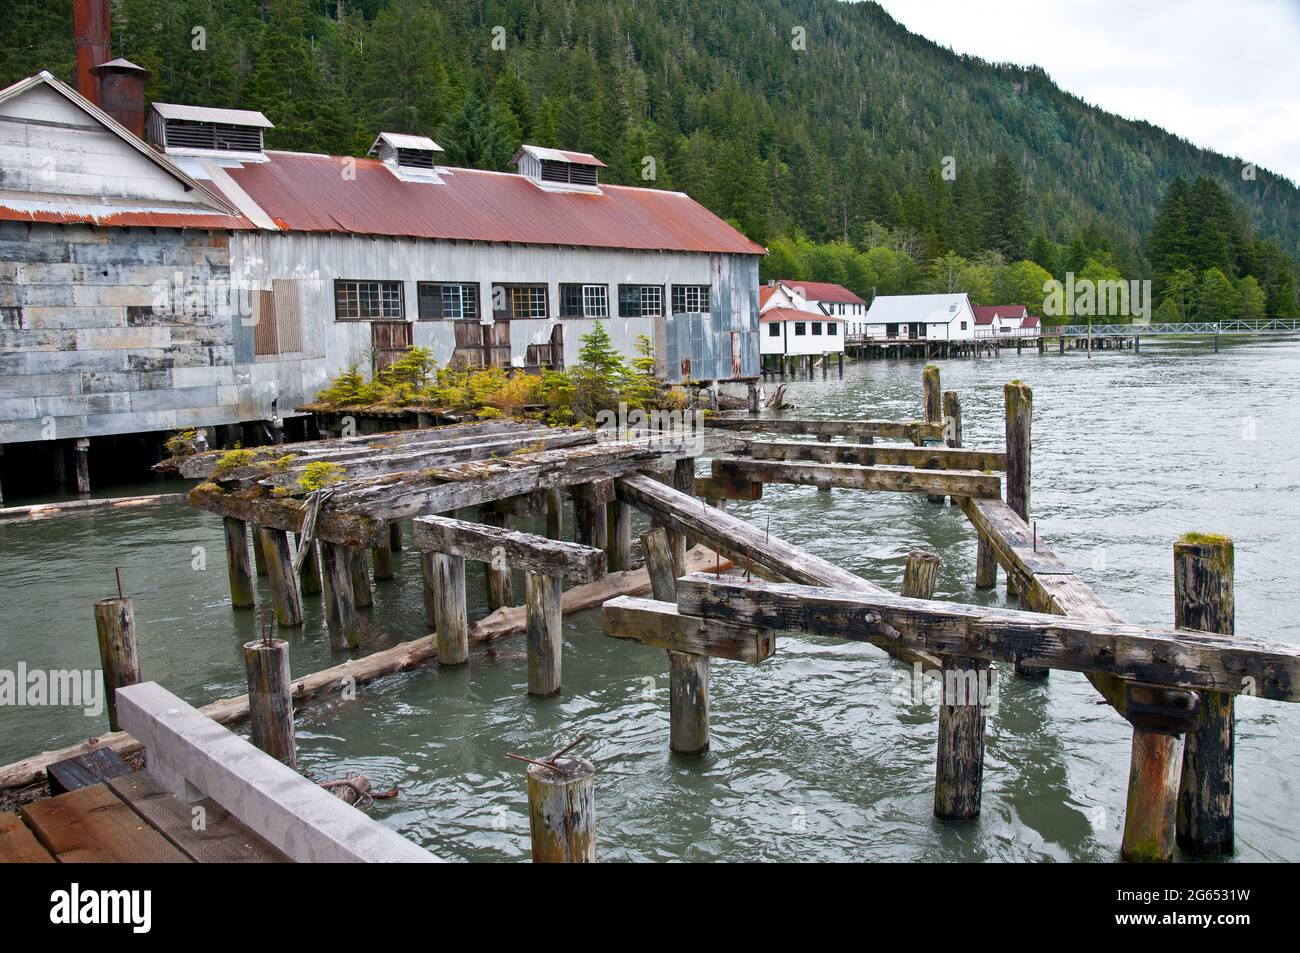 North Pacific Cannery, Prince Rupert, British Columbia, Canada Foto Stock